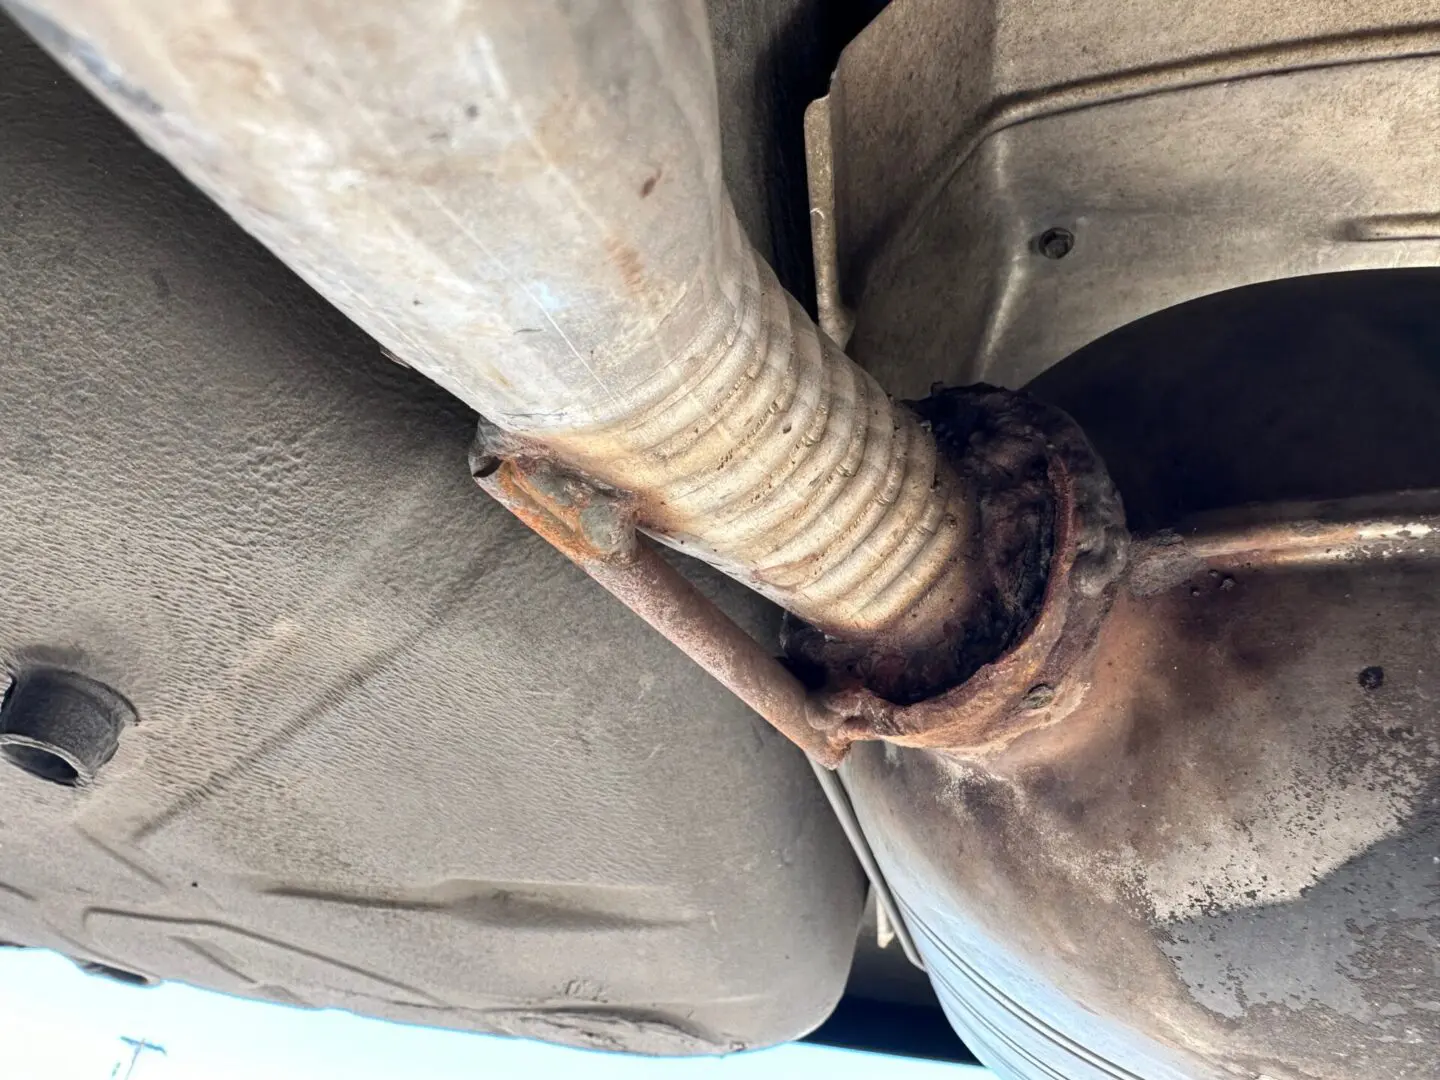 A close up of the exhaust pipe on a car